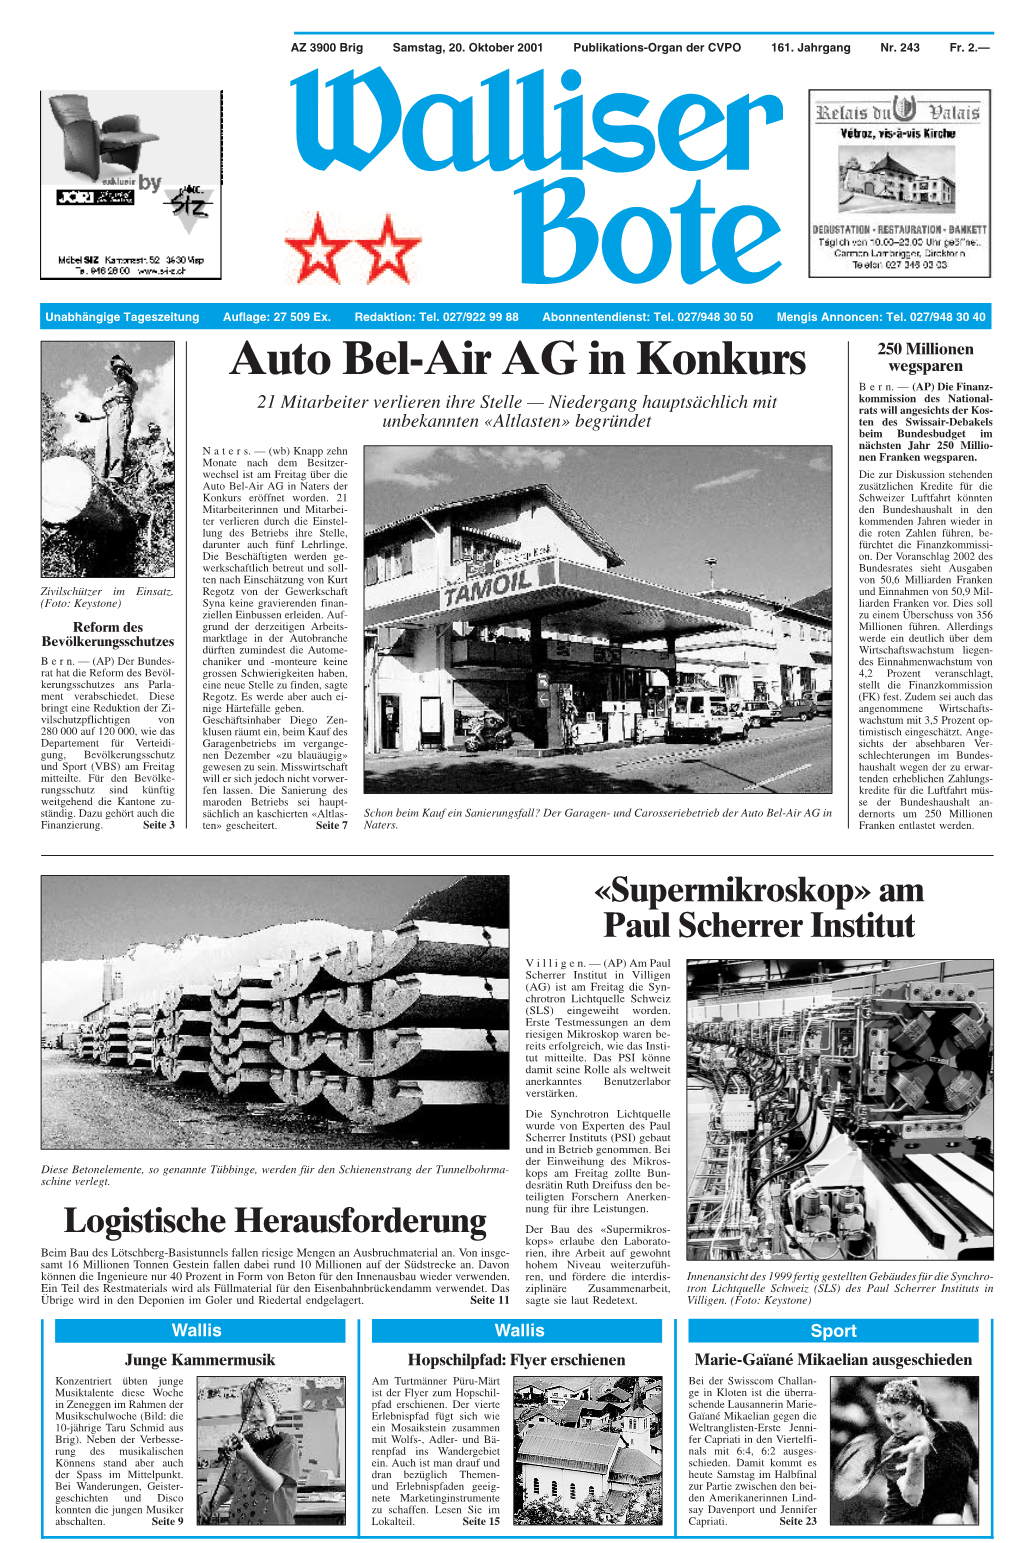 Auto Bel-Air AG in Konkurs